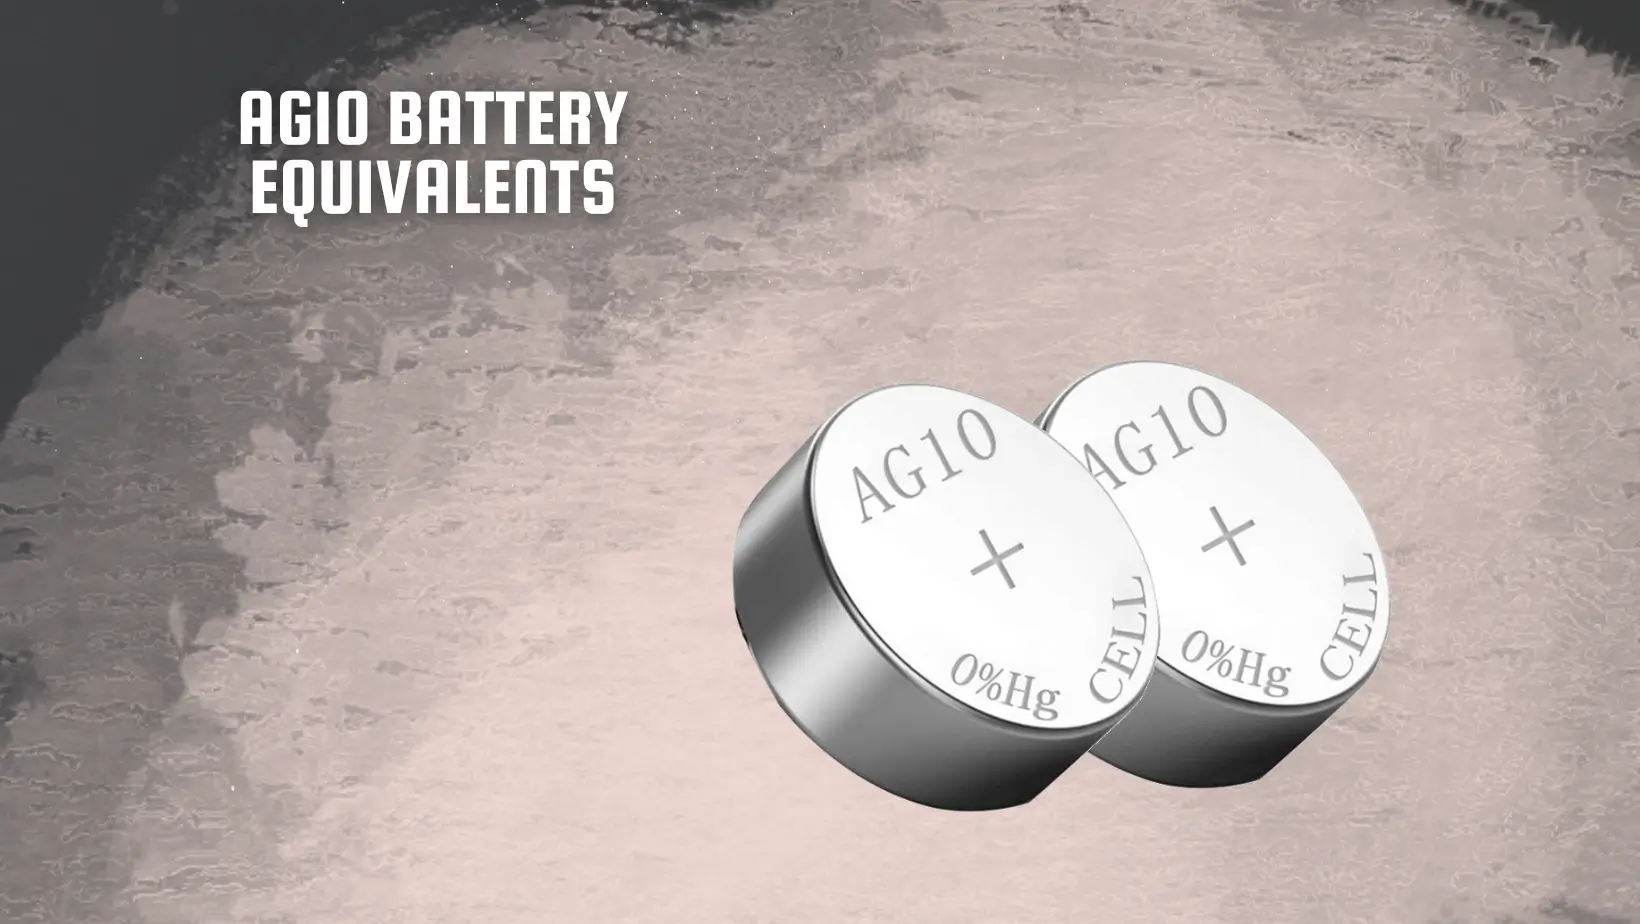 AG10 Battery Equivalents